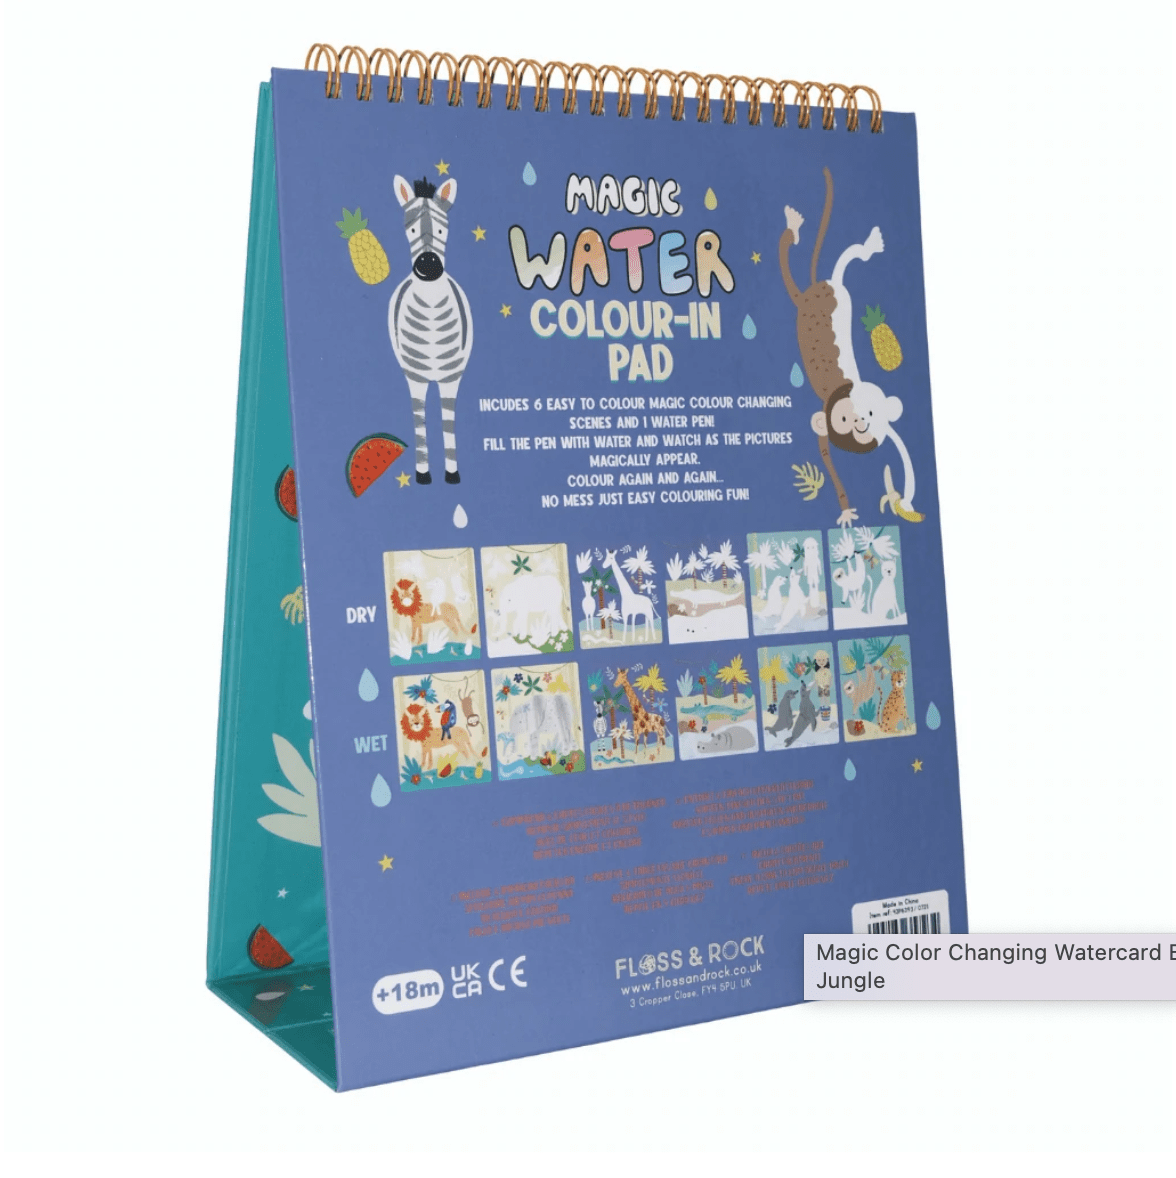 Magic Color Changing Watercard Easel and Pen - Jungle - Twinkle Twinkle Little One